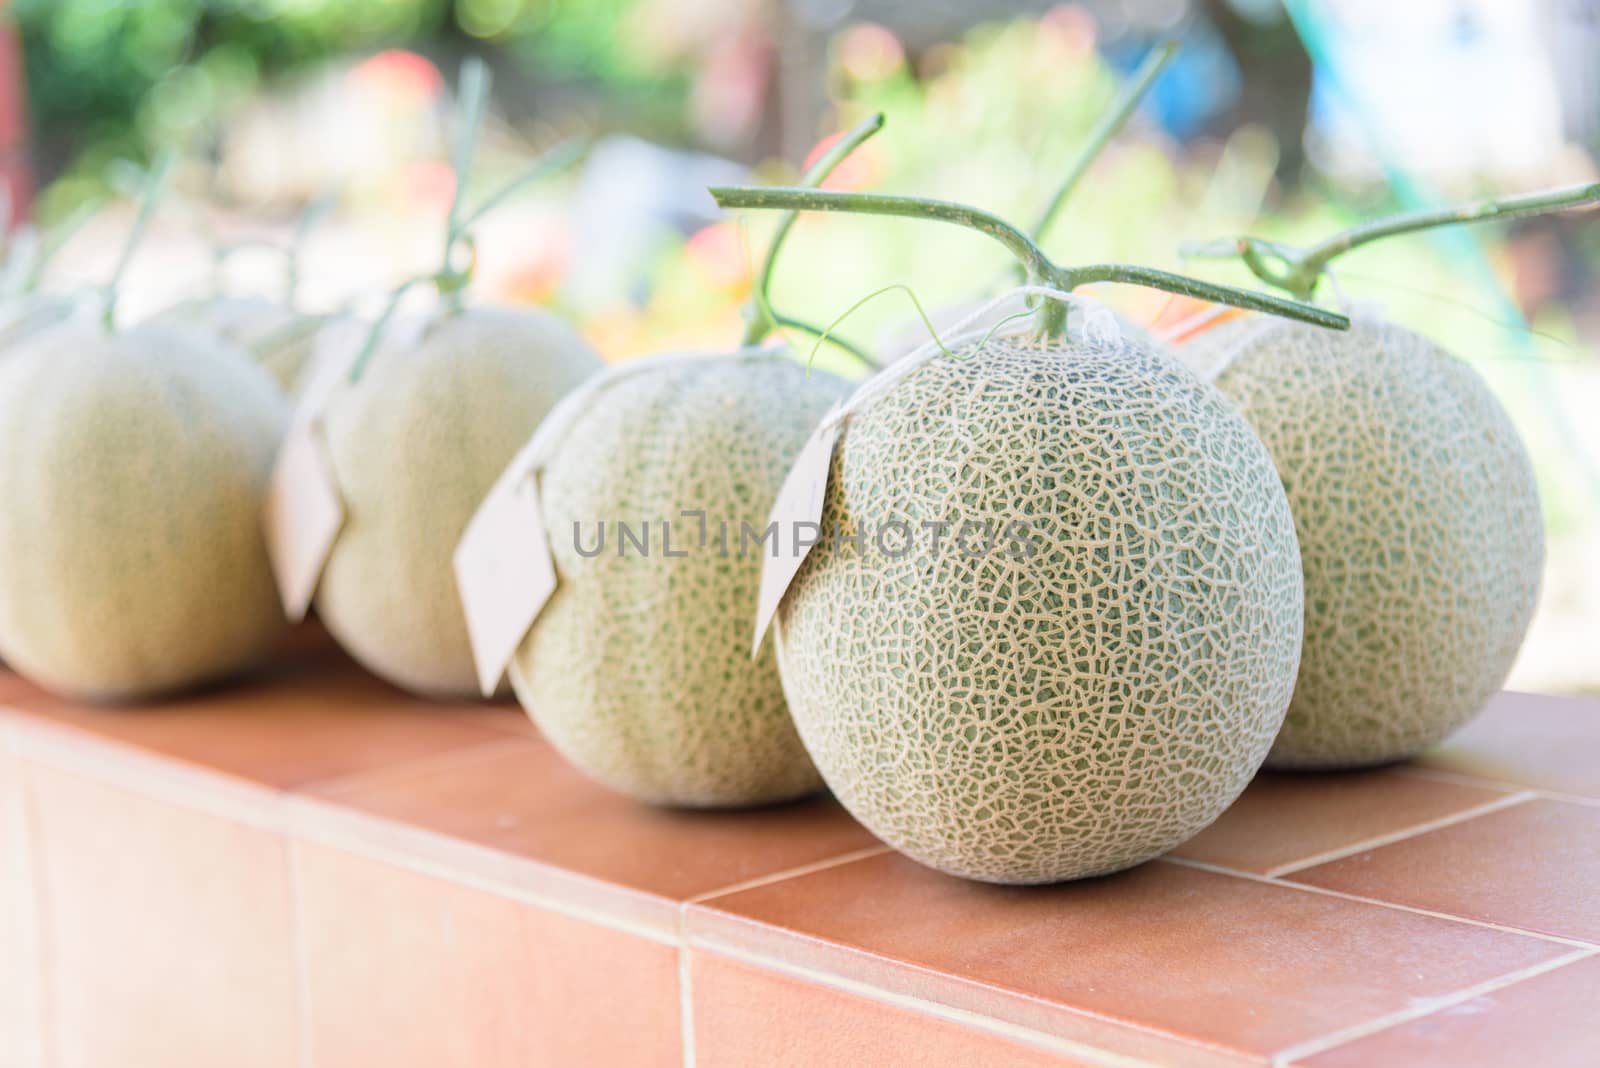 Fresh melon on the table by rukawajung